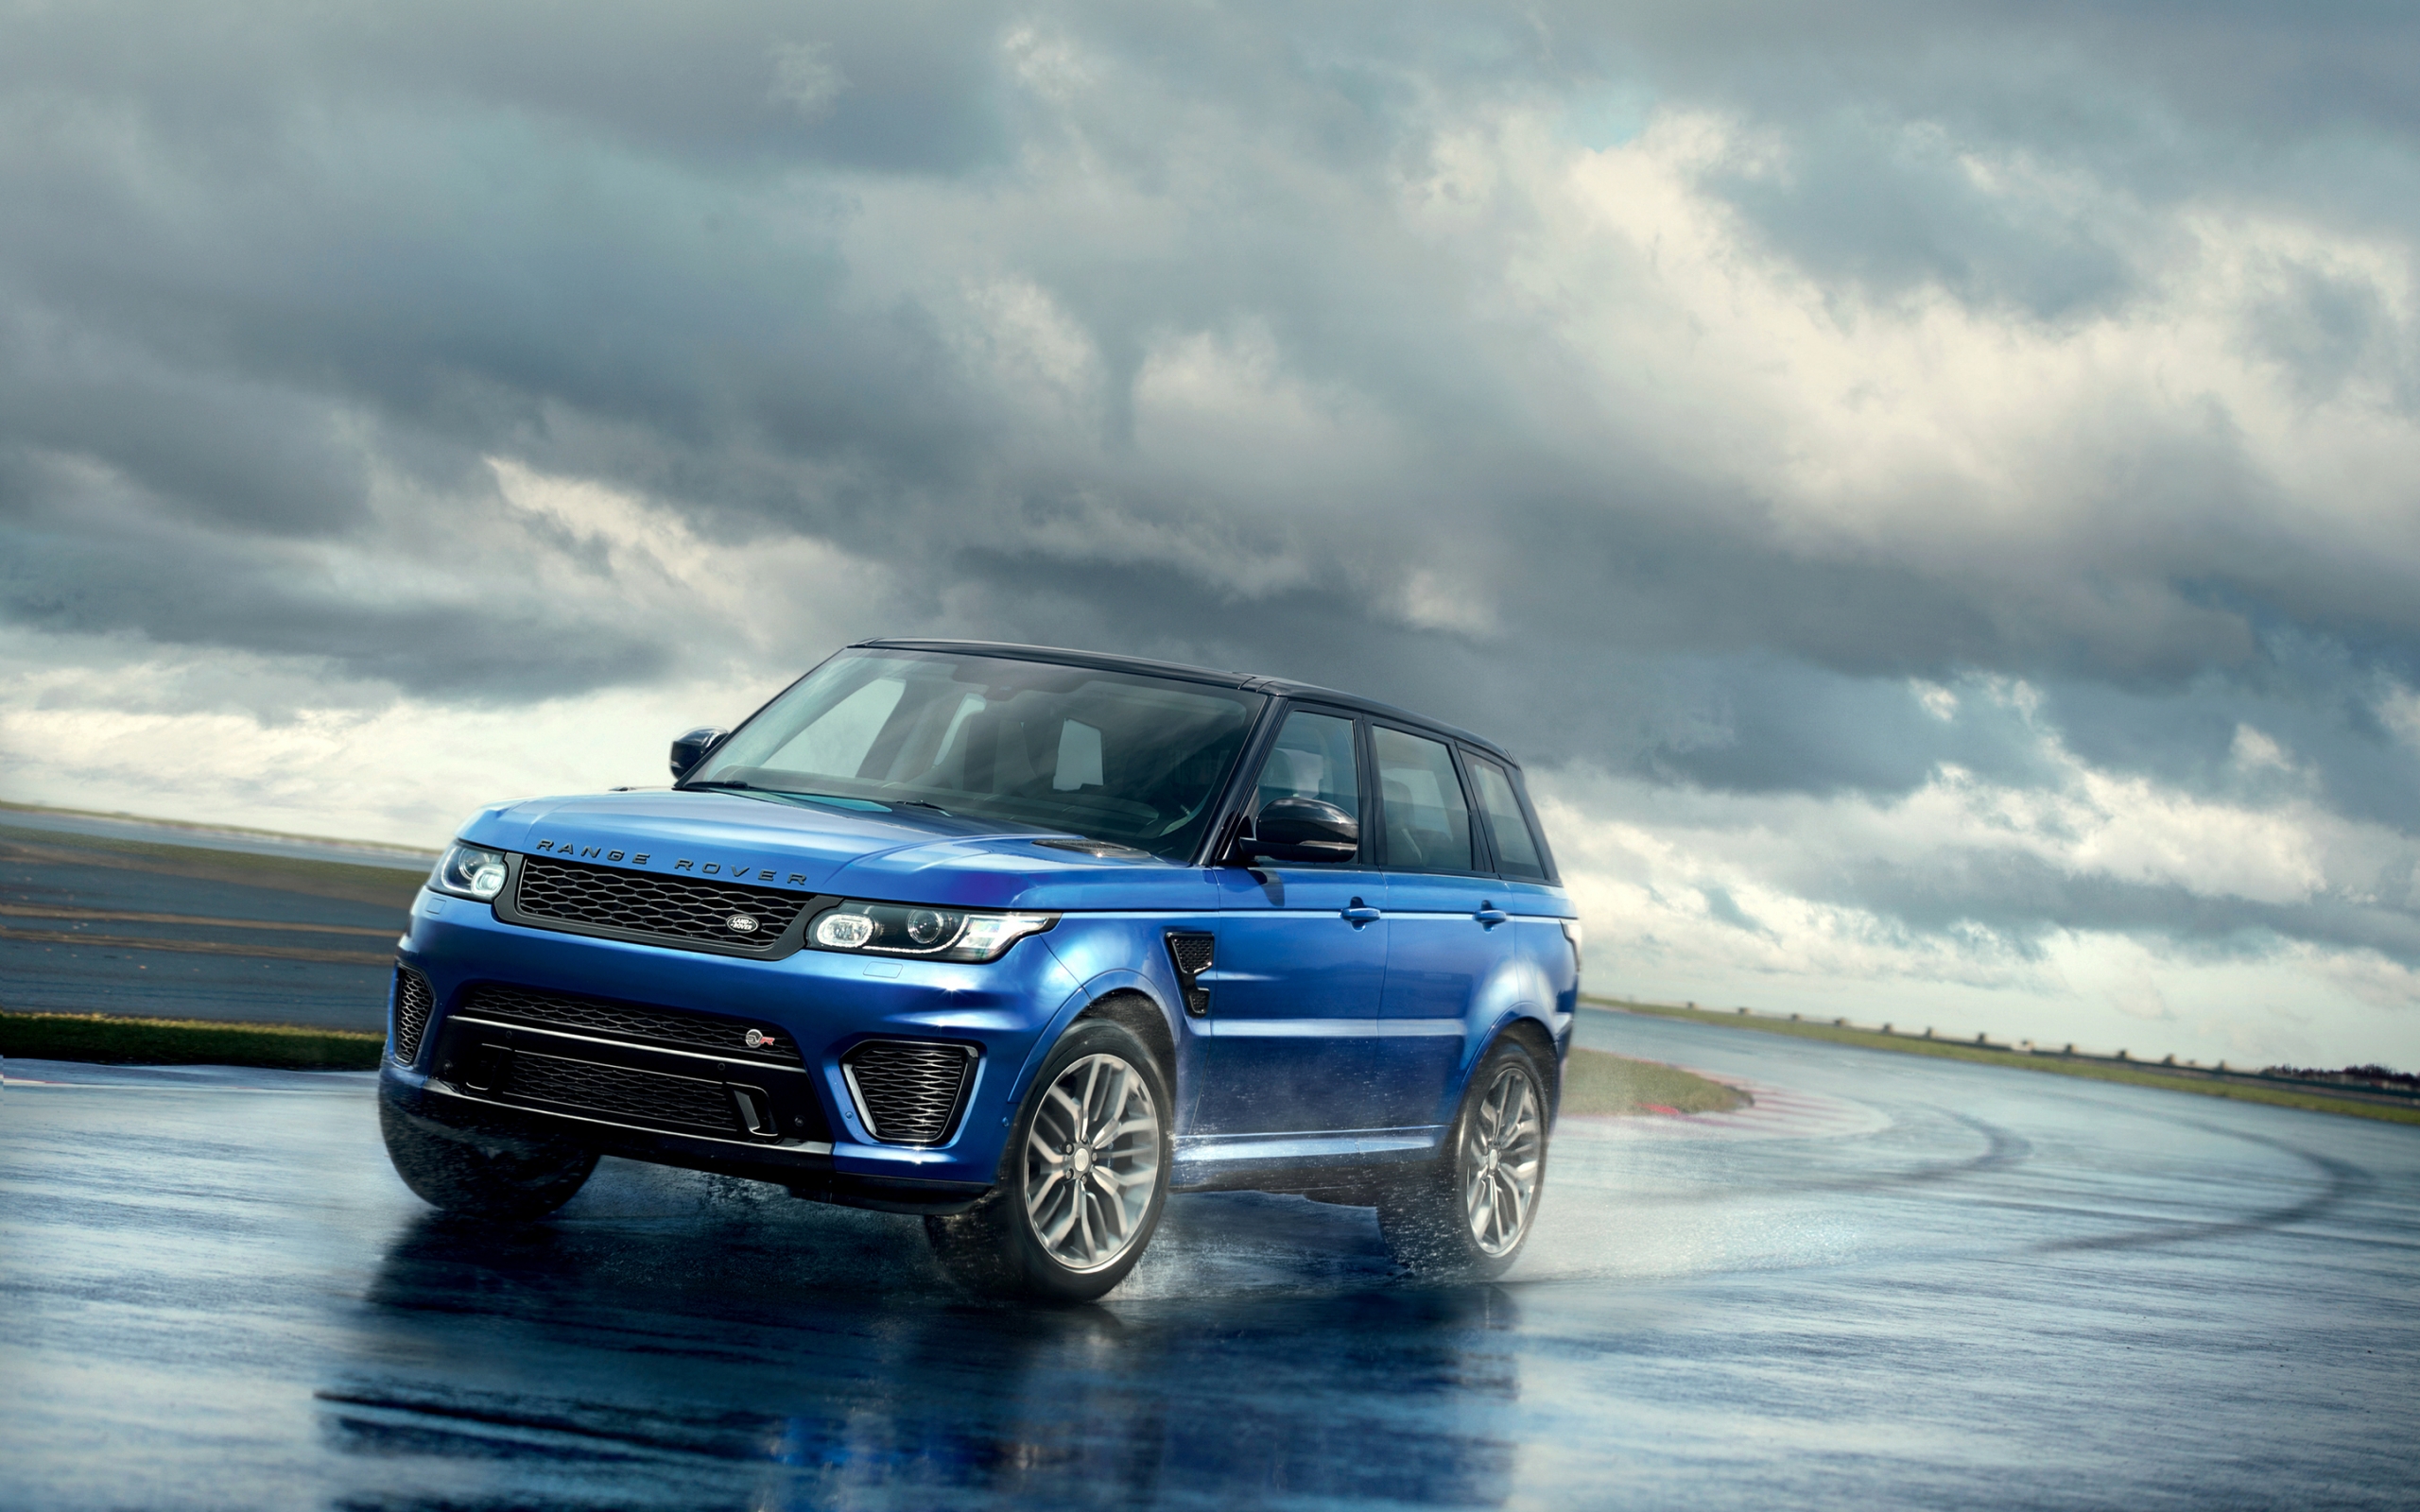 Gorgeous Blue Range Rover for 2560 x 1600 widescreen resolution